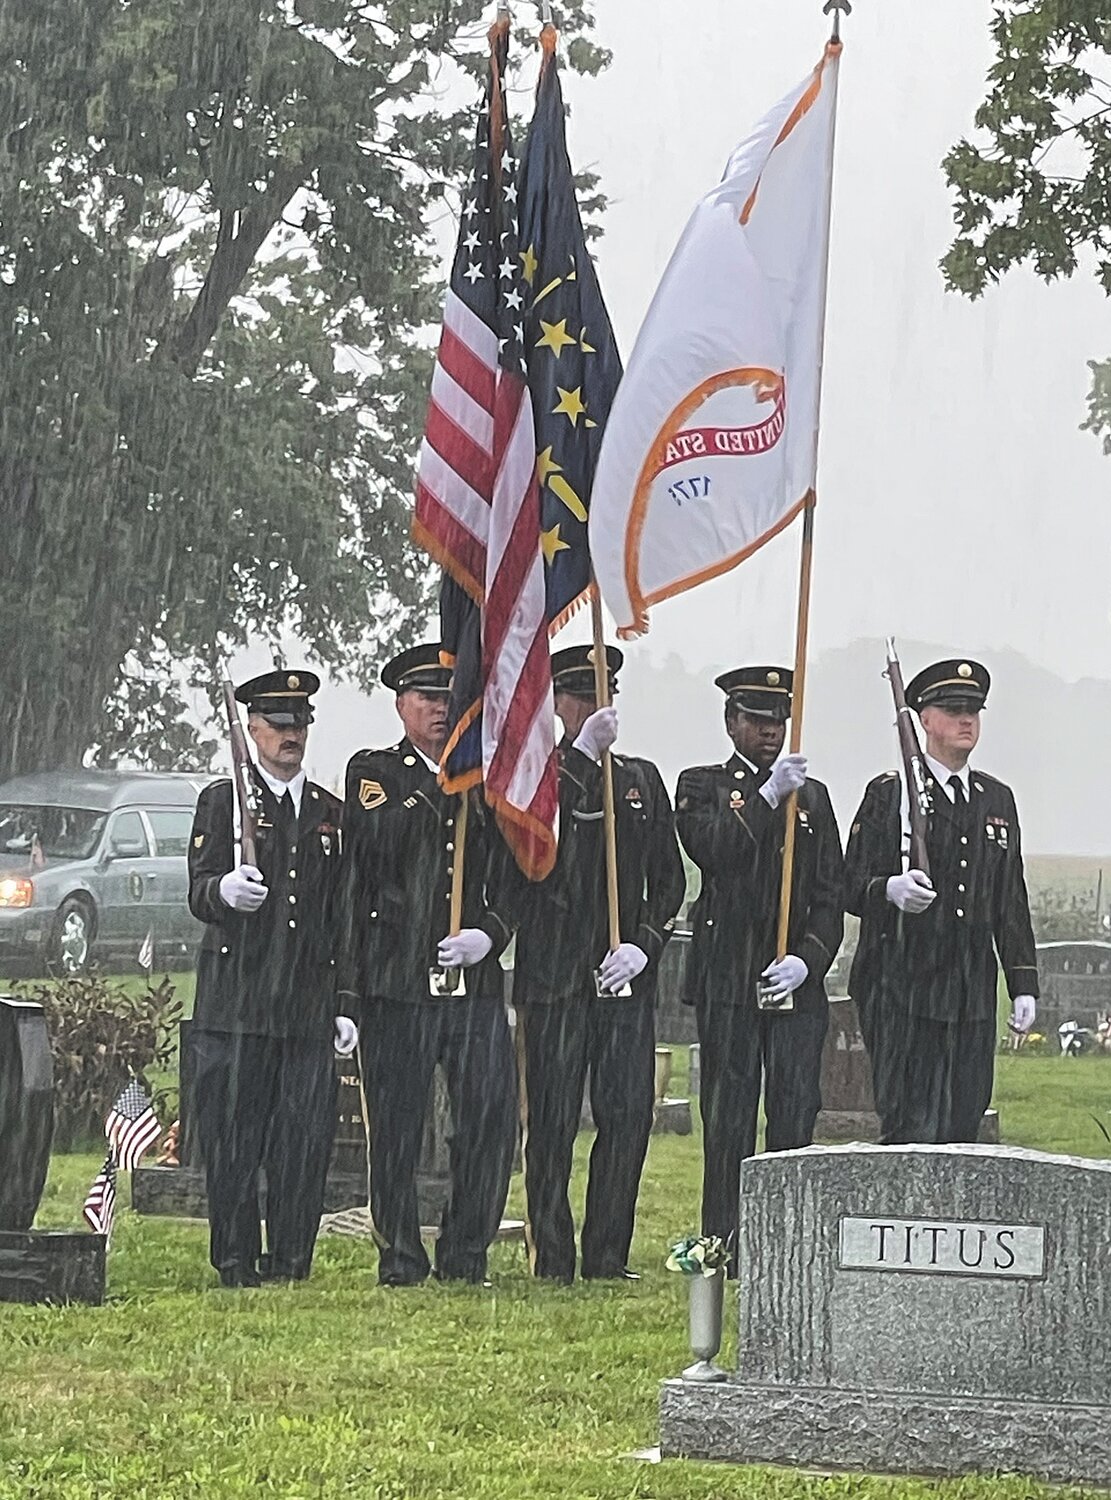 Members of the Indiana National Guard Color Guard stand in the pouring rain.